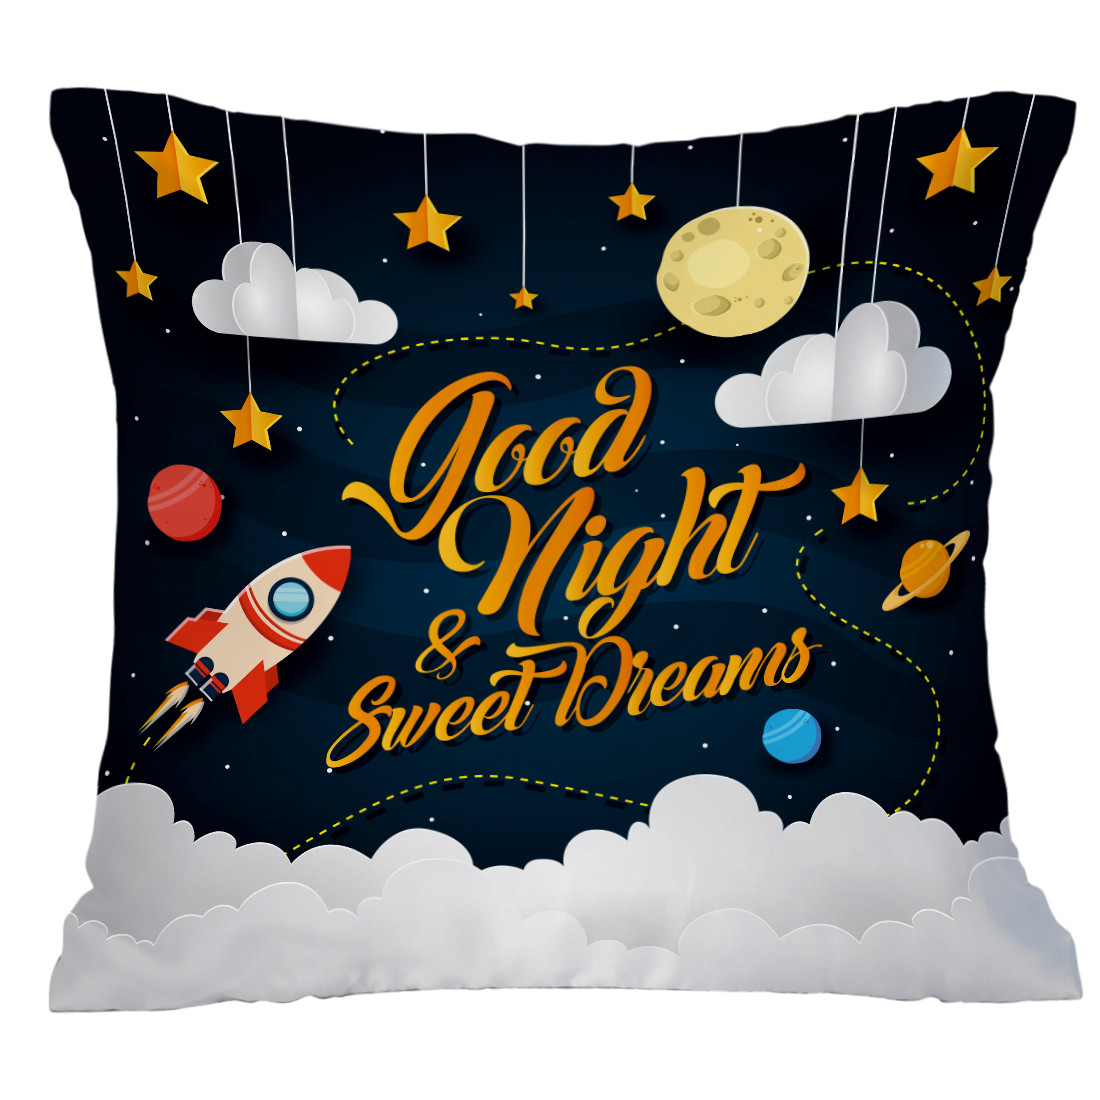 Good Night Lamp With Sweet Dreams Text Message – India's Gift Store